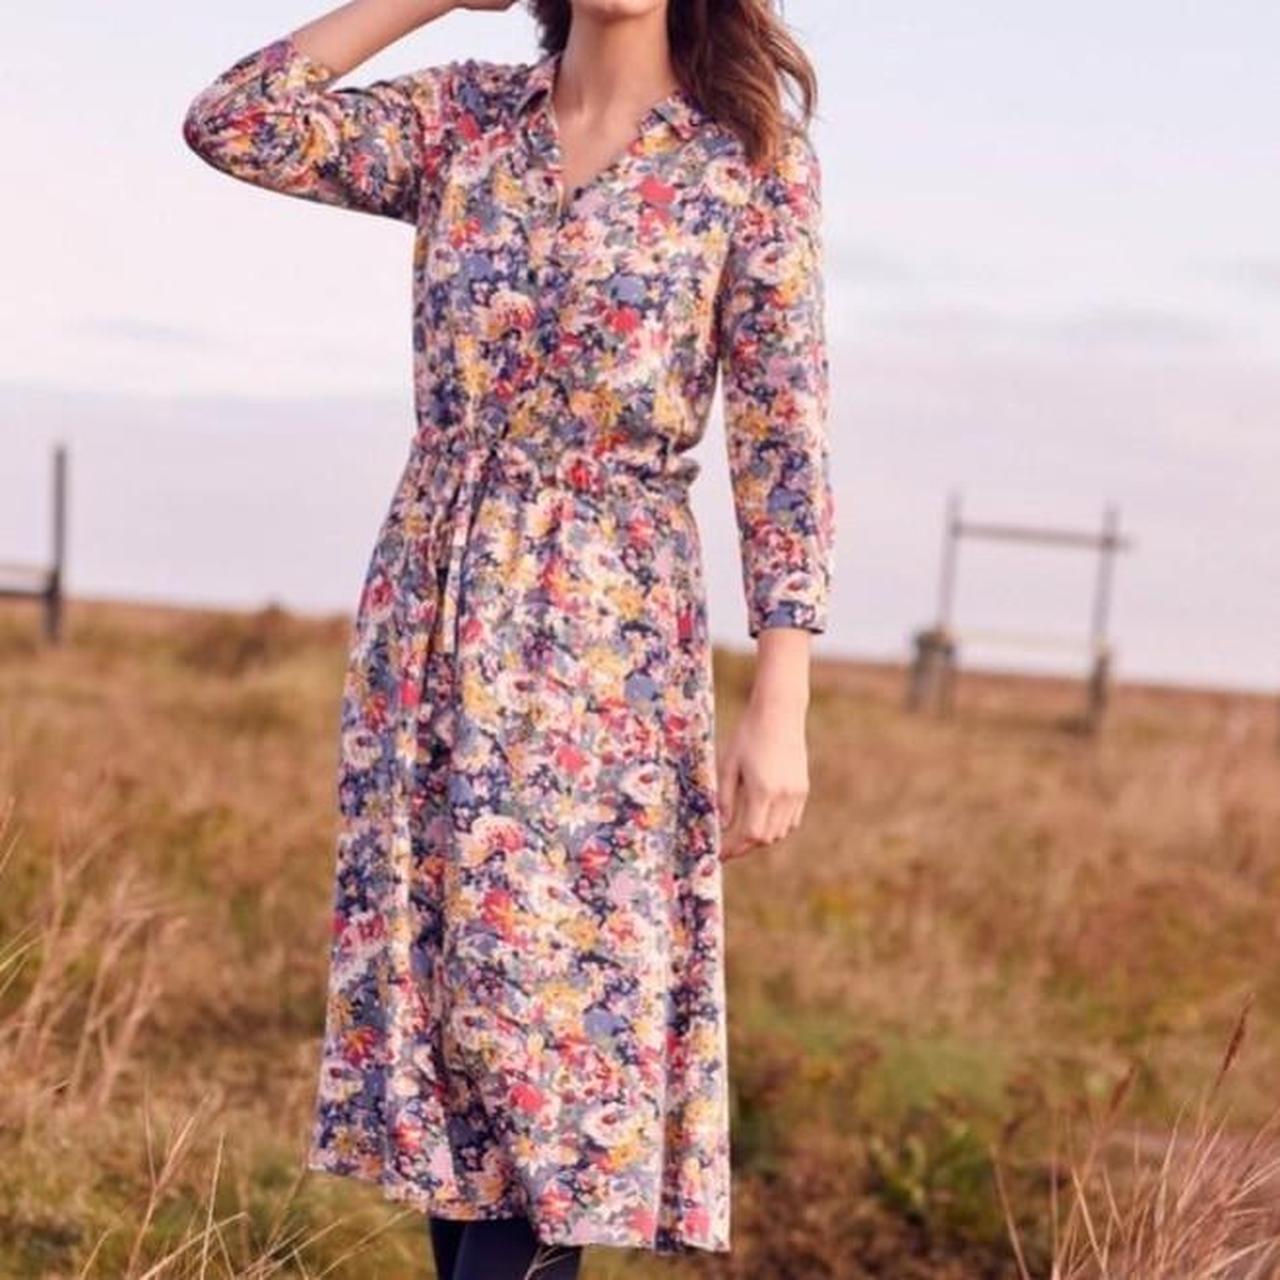 Buy Joules Imogen Long Sleeve Belted Midi Dress from the Joules